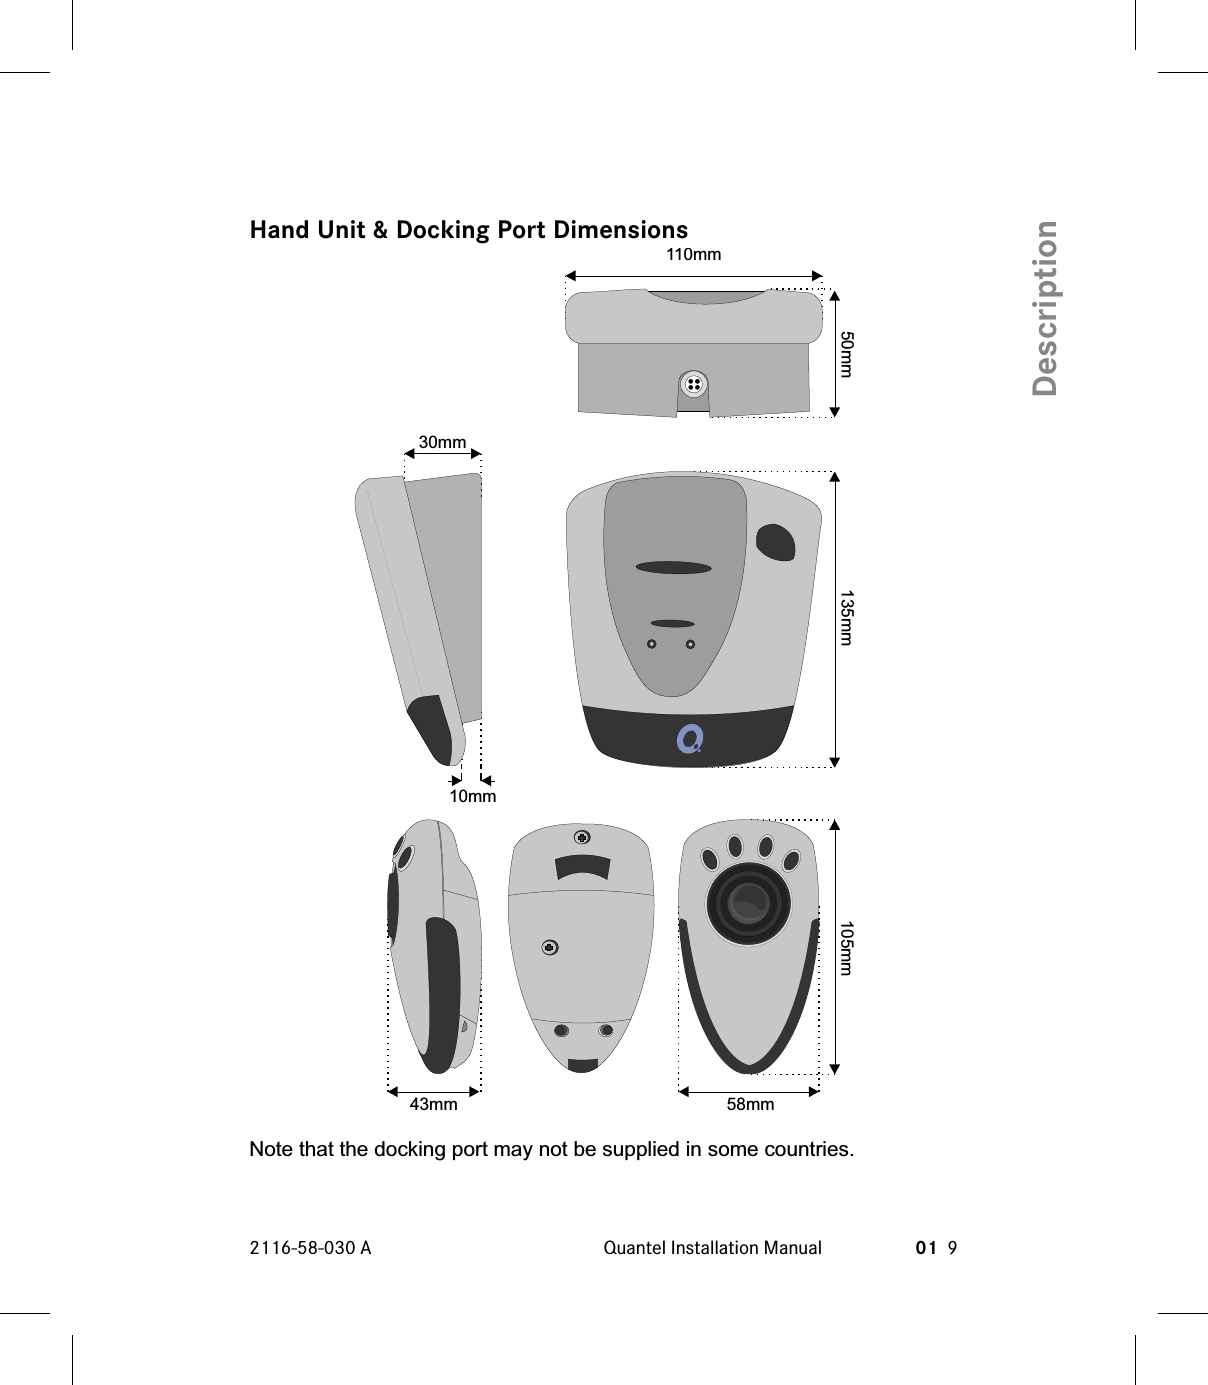 Hand Unit &amp; Docking Port DimensionsNote that the docking port may not be supplied in some countries.2116-58-030 A Quantel Installation Manual 01 9Description110mm30mm10mm58mm43mm50mm 135mm 105mm